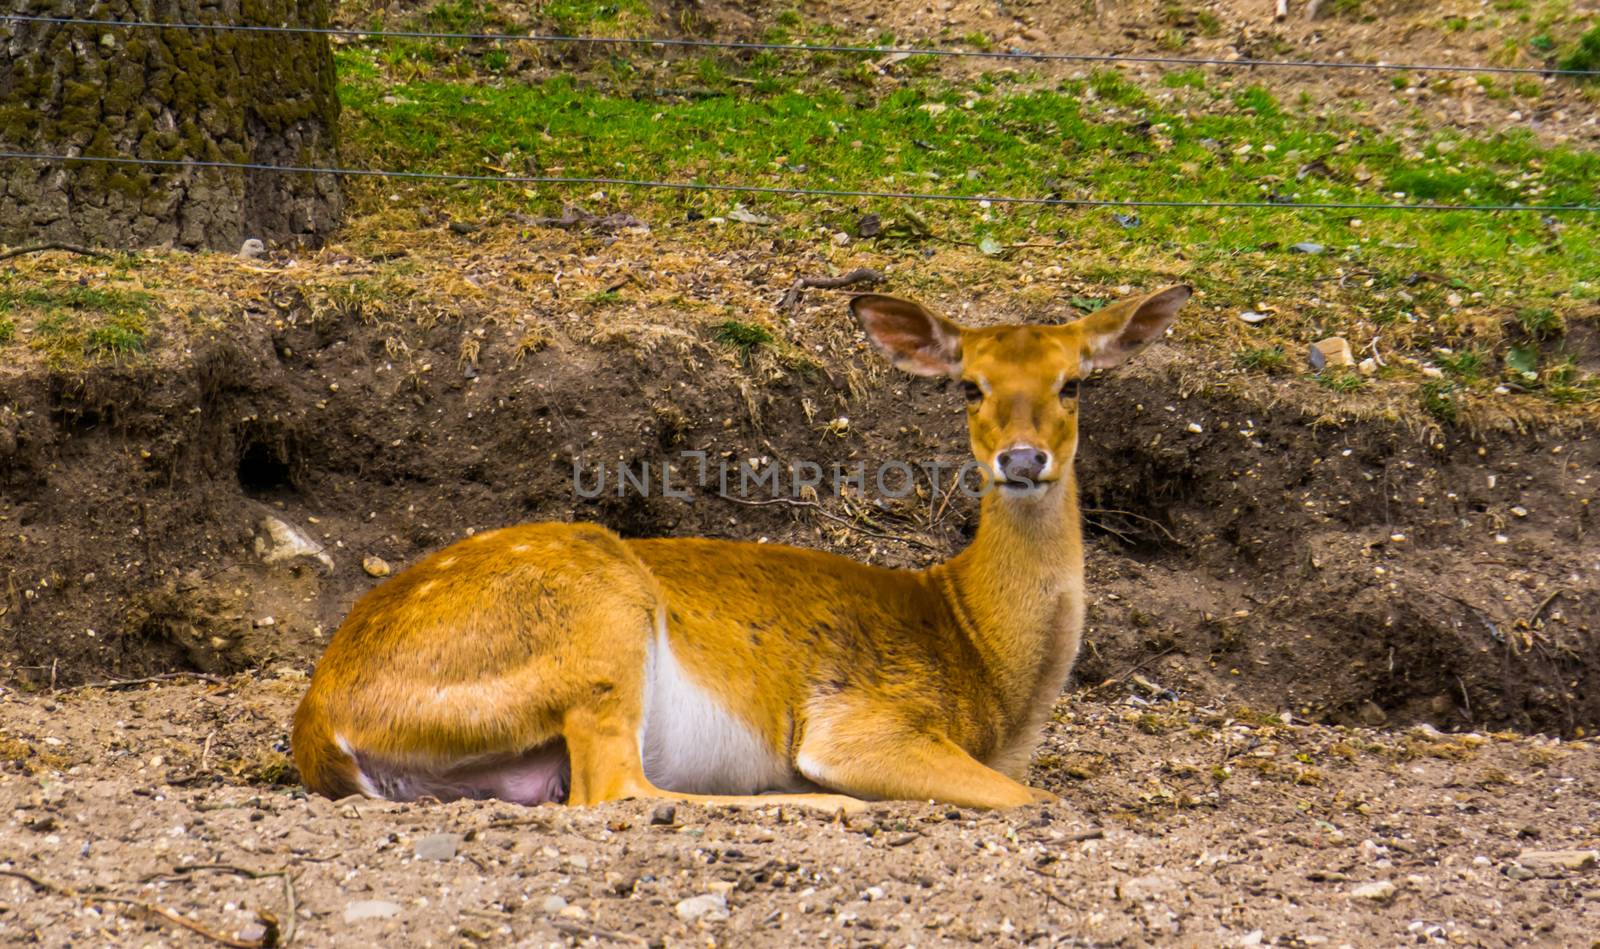 closeup portrait of a female eld's deer laying on the ground, Endangered animal specie from South Asia by charlottebleijenberg